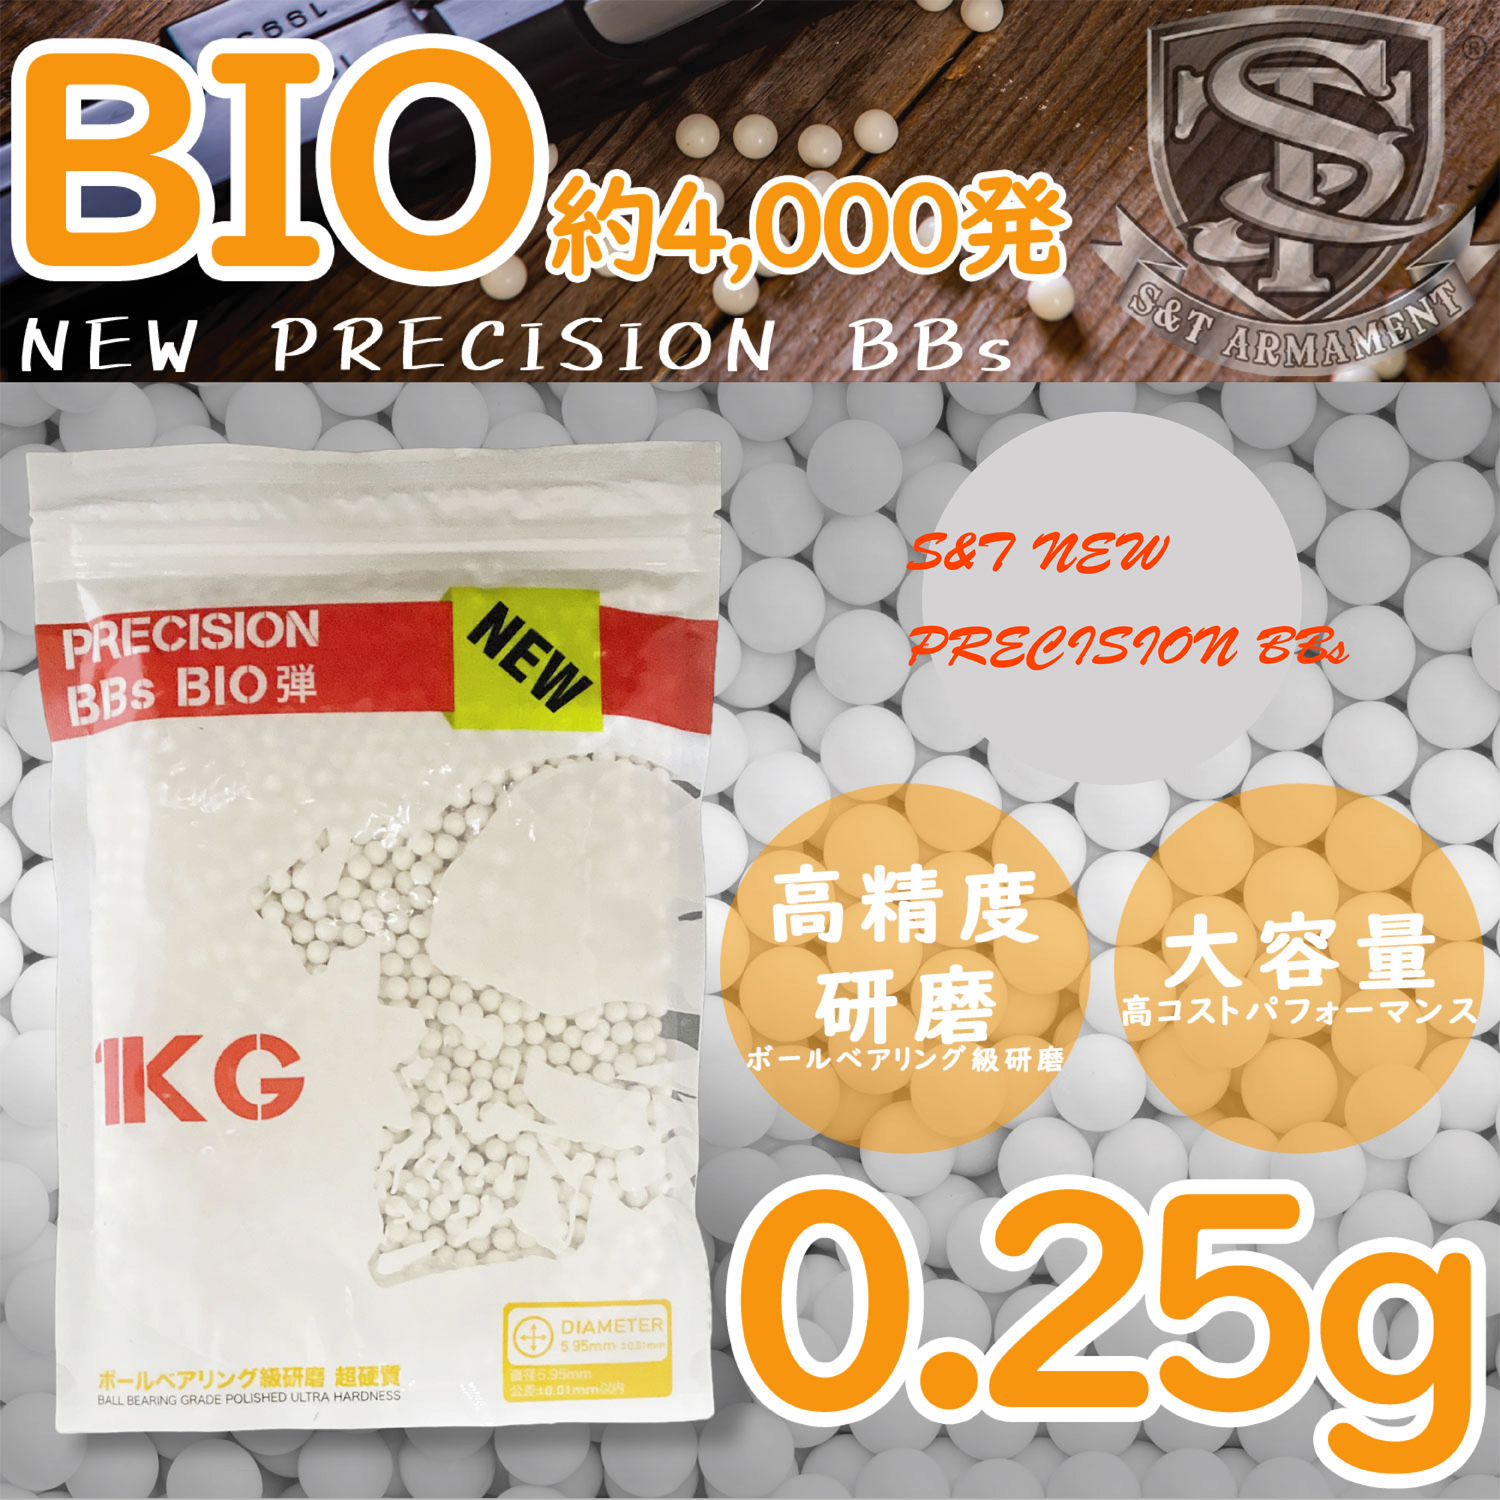 S&amp;T NEW PRECISION 6mm Vaio BB.(BIO) 0.25g approximately 4000 departure 